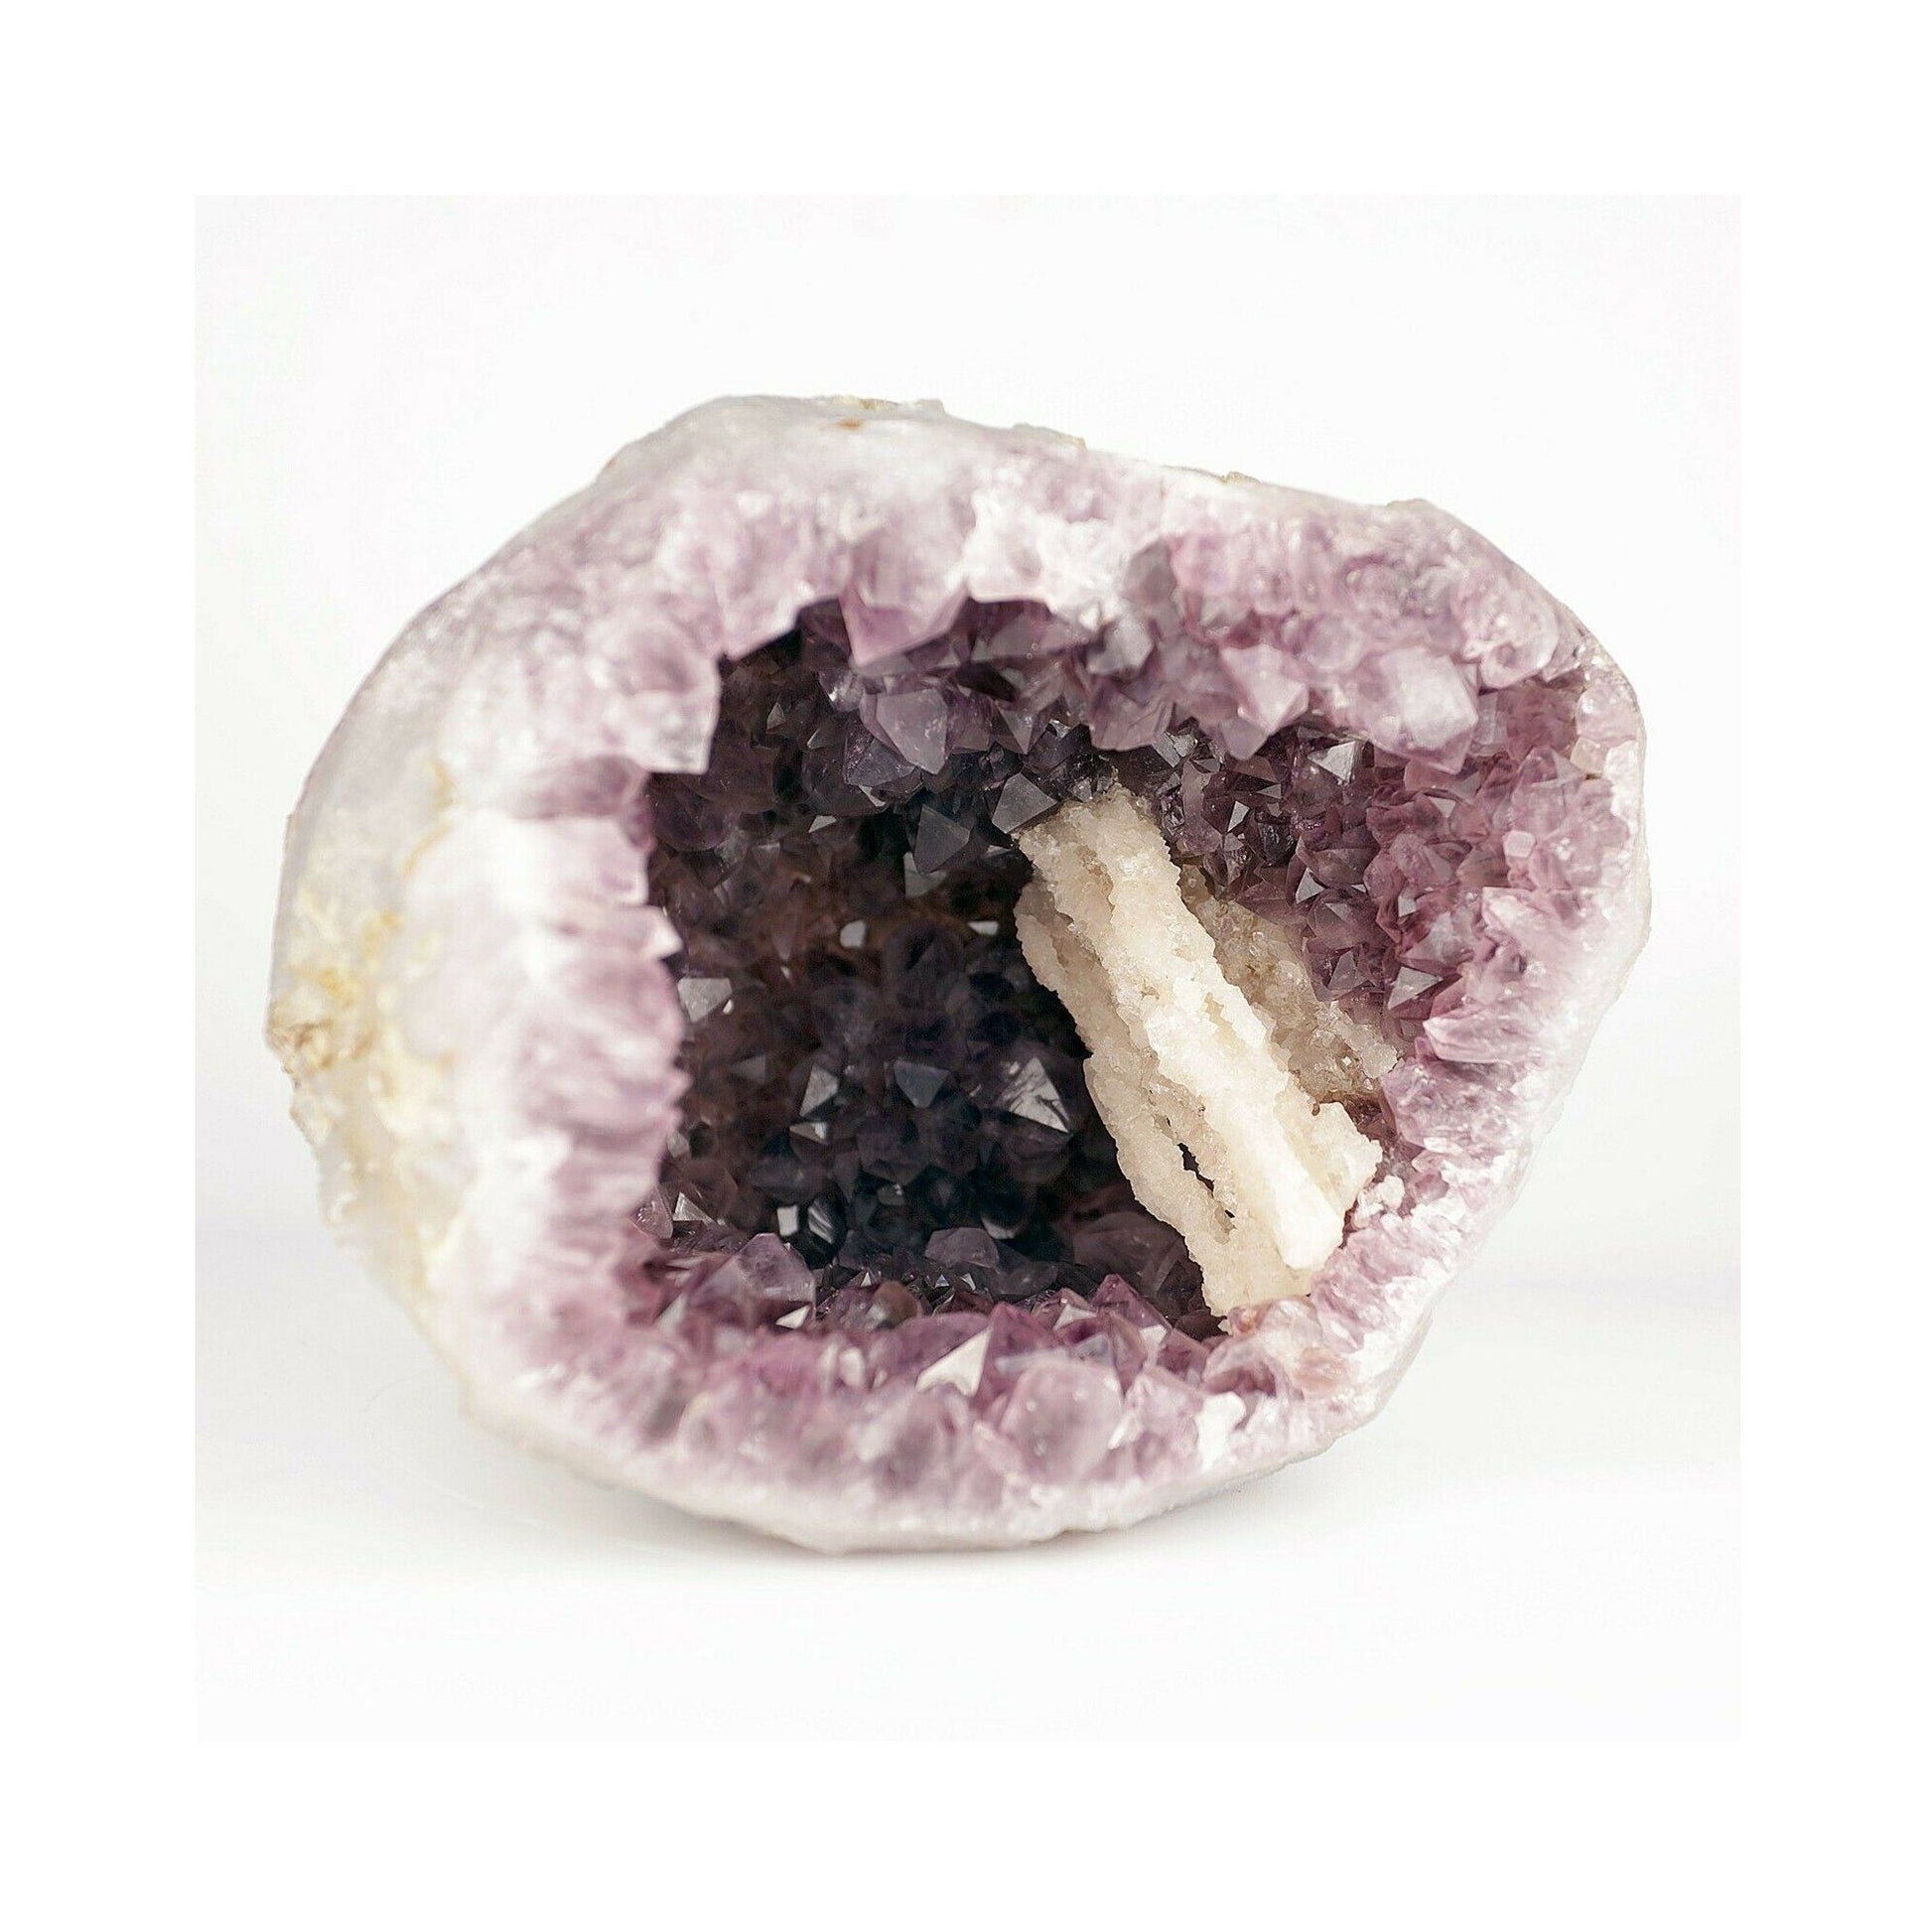 Amethyst purple geod formation with Calcite Natural Mineral Specimen # b3669 An Amethyst Quartz Geode from India! The Amethyst is lustrous and a unique purple color on a colorless Chalcedony. There is banding clearly present on the opening edge, and there is a unique thin reddish-brown streak around the inside of the geode due to a self-healed fracture on the outside of the geode.